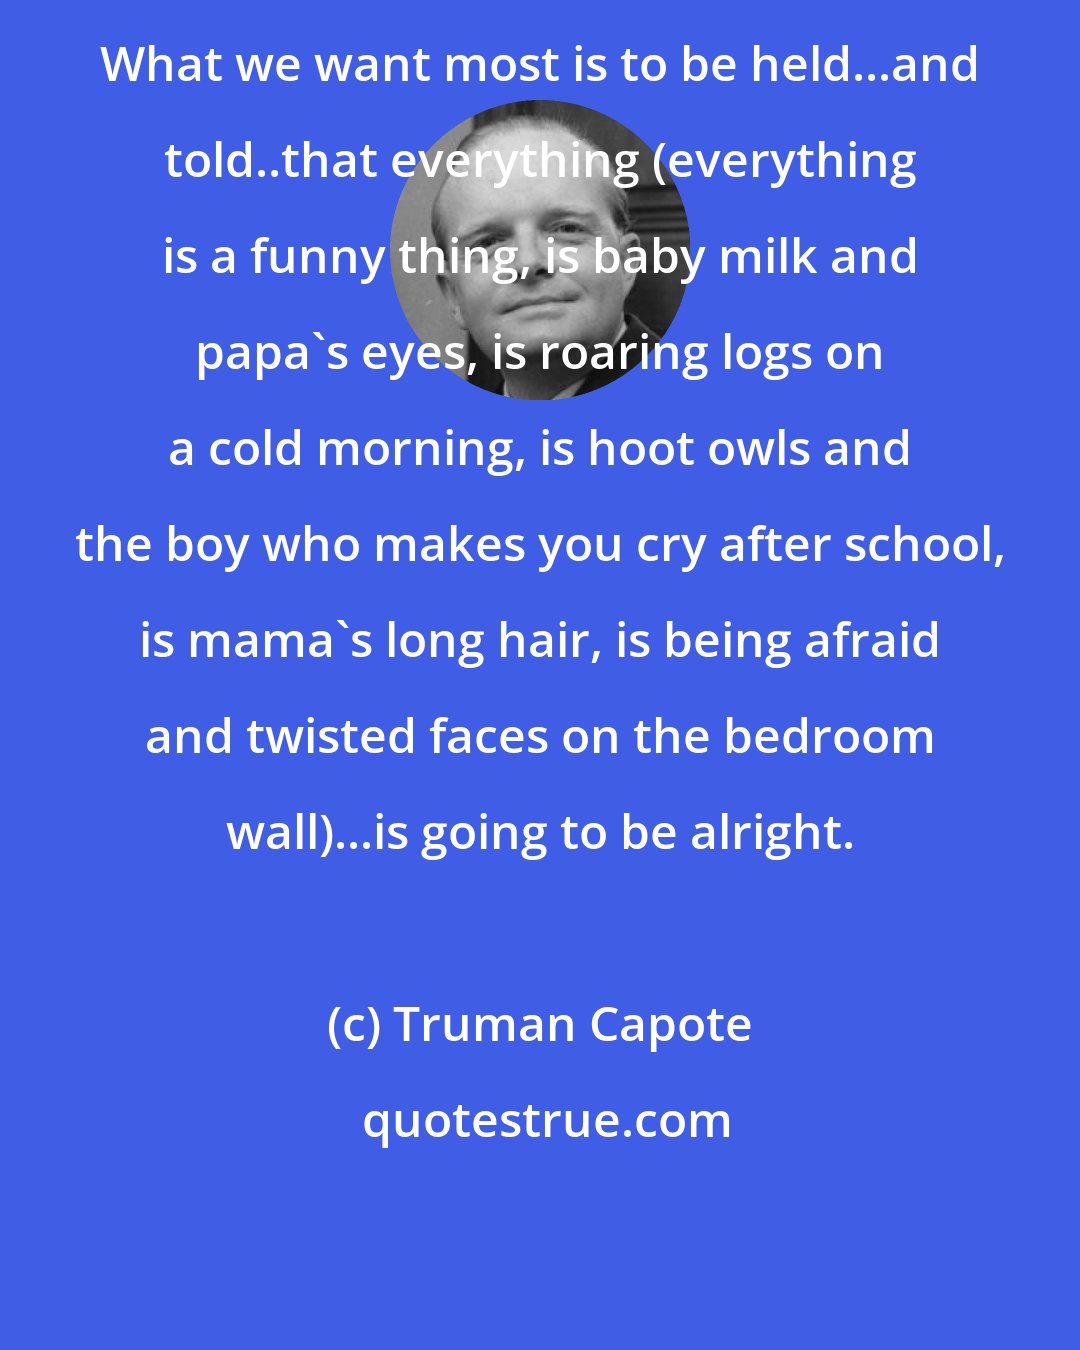 Truman Capote: What we want most is to be held...and told..that everything (everything is a funny thing, is baby milk and papa's eyes, is roaring logs on a cold morning, is hoot owls and the boy who makes you cry after school, is mama's long hair, is being afraid and twisted faces on the bedroom wall)...is going to be alright.